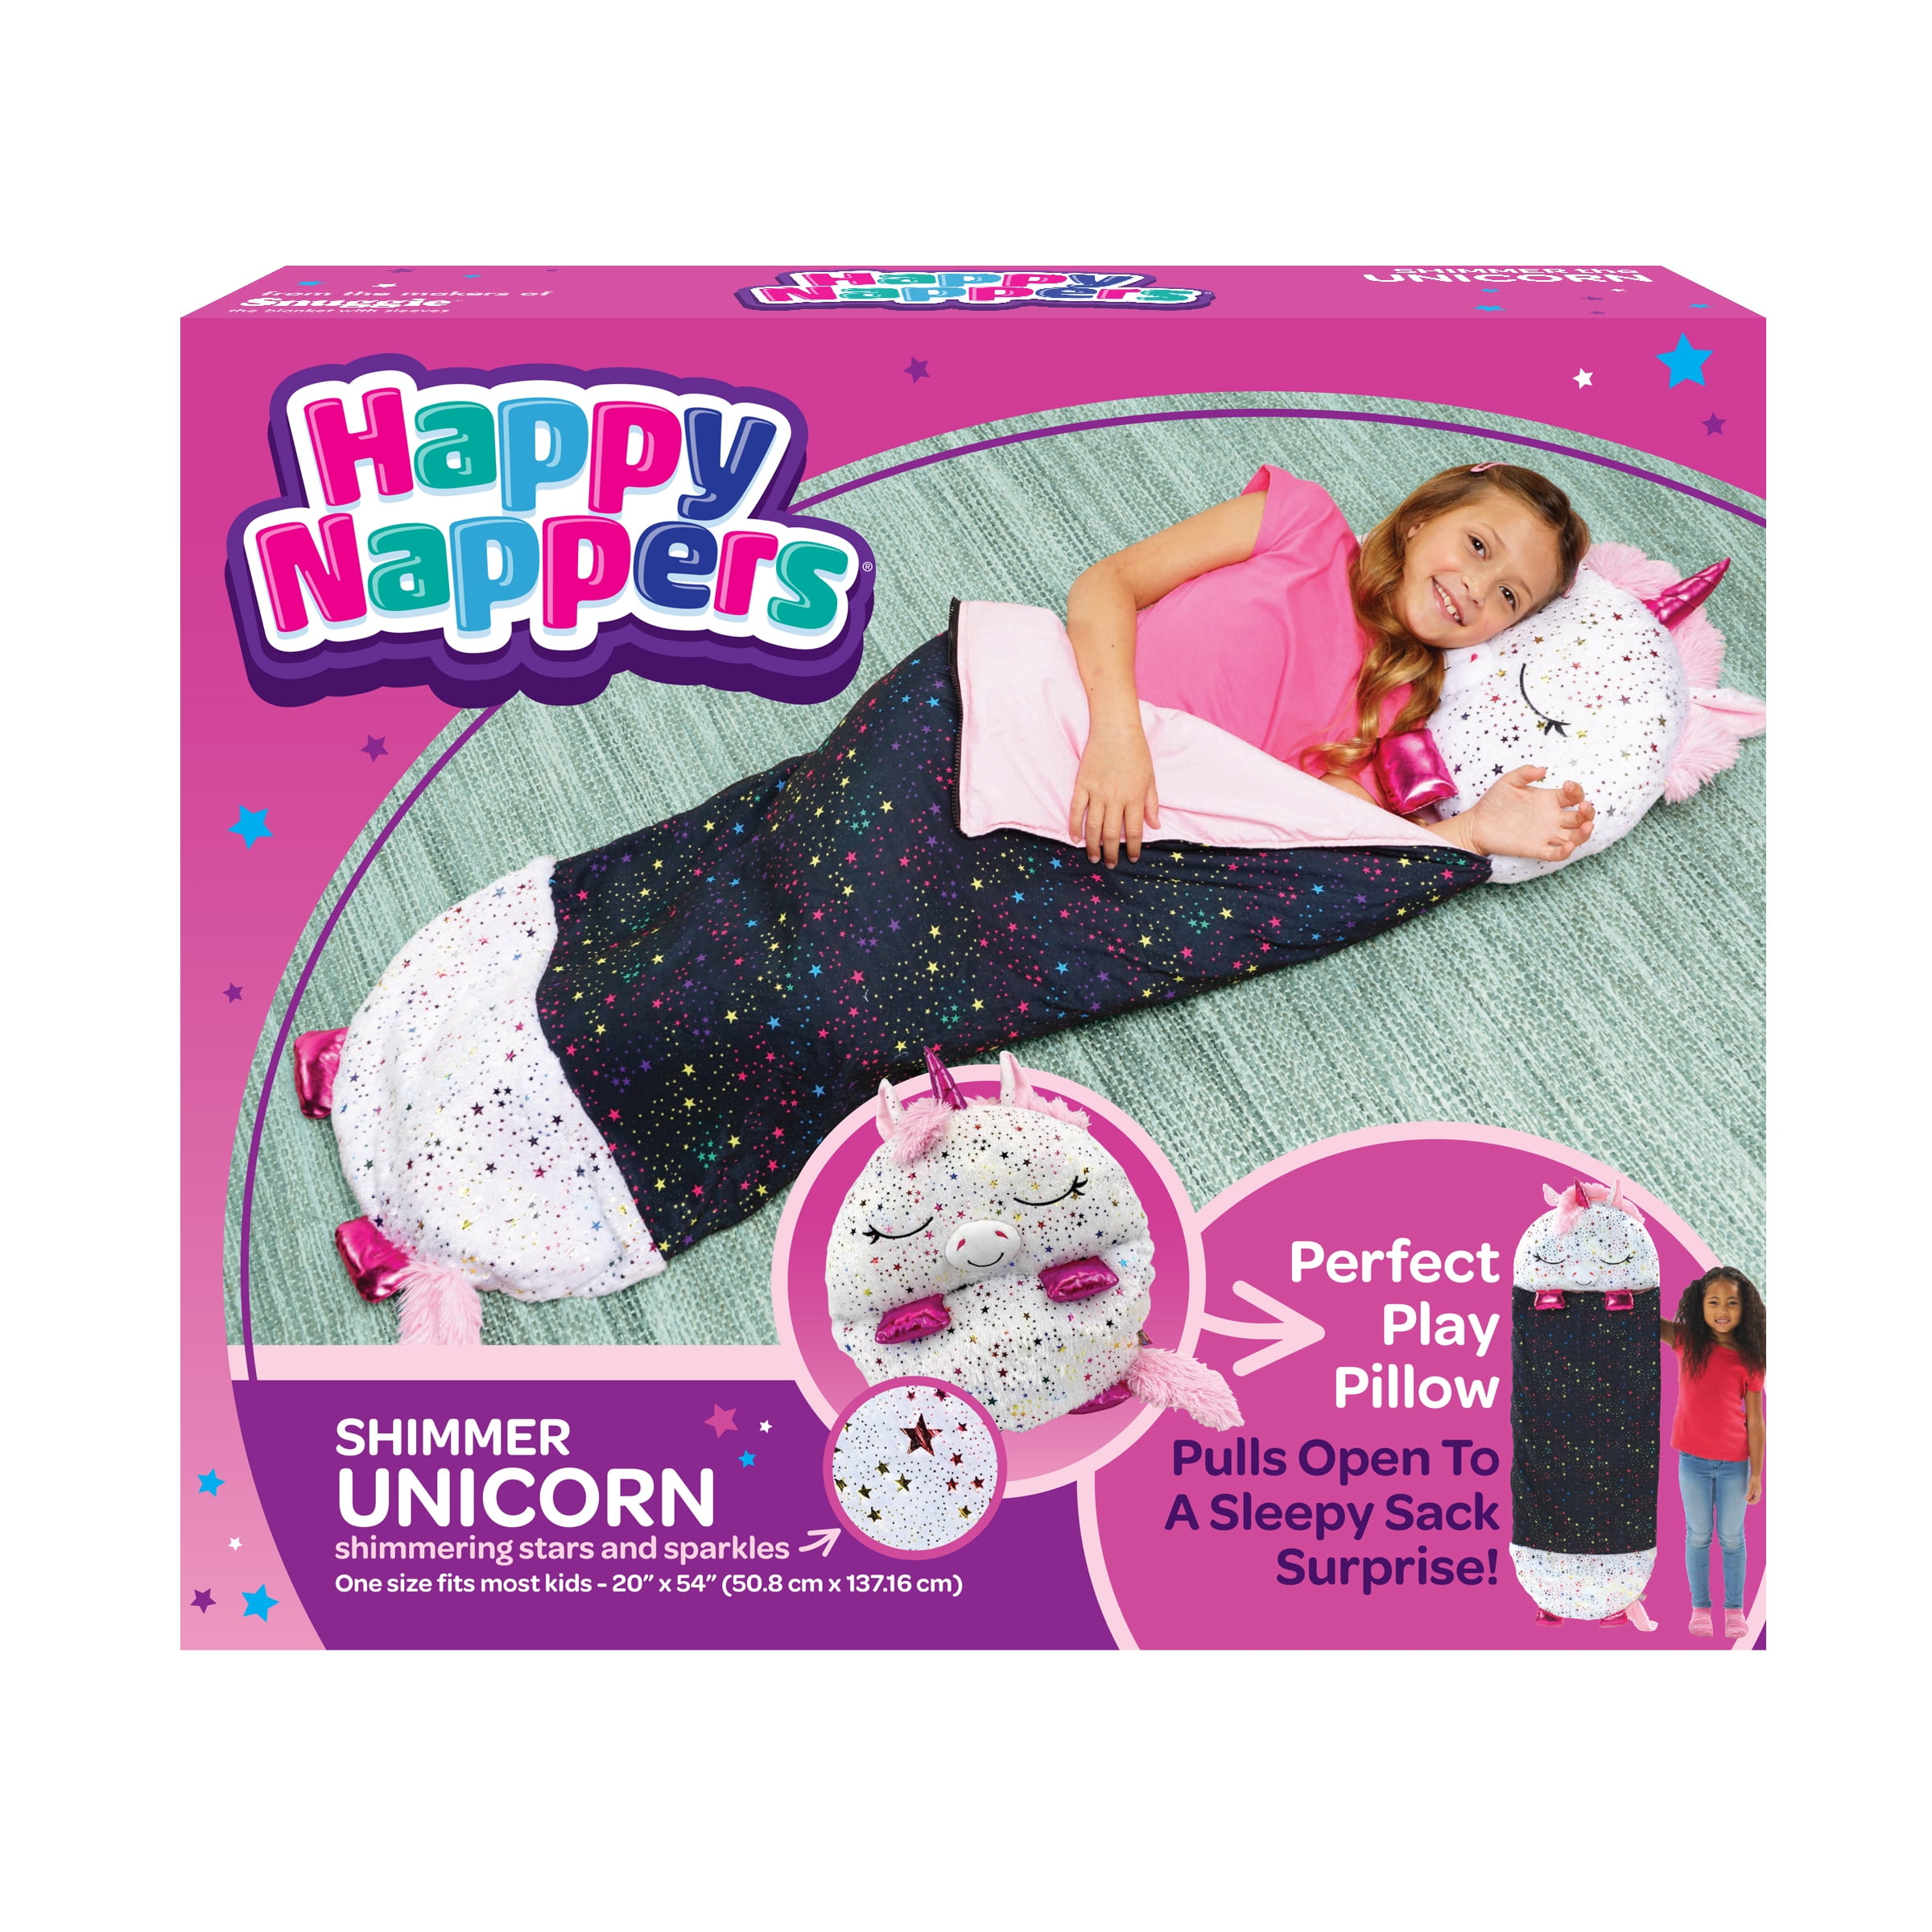 Happy Nappers Large Game Pillow And Sleeping Bag, Fun One Piece Kids  Pajamas Sleeping Bags, For Surprise Kids (White,L)